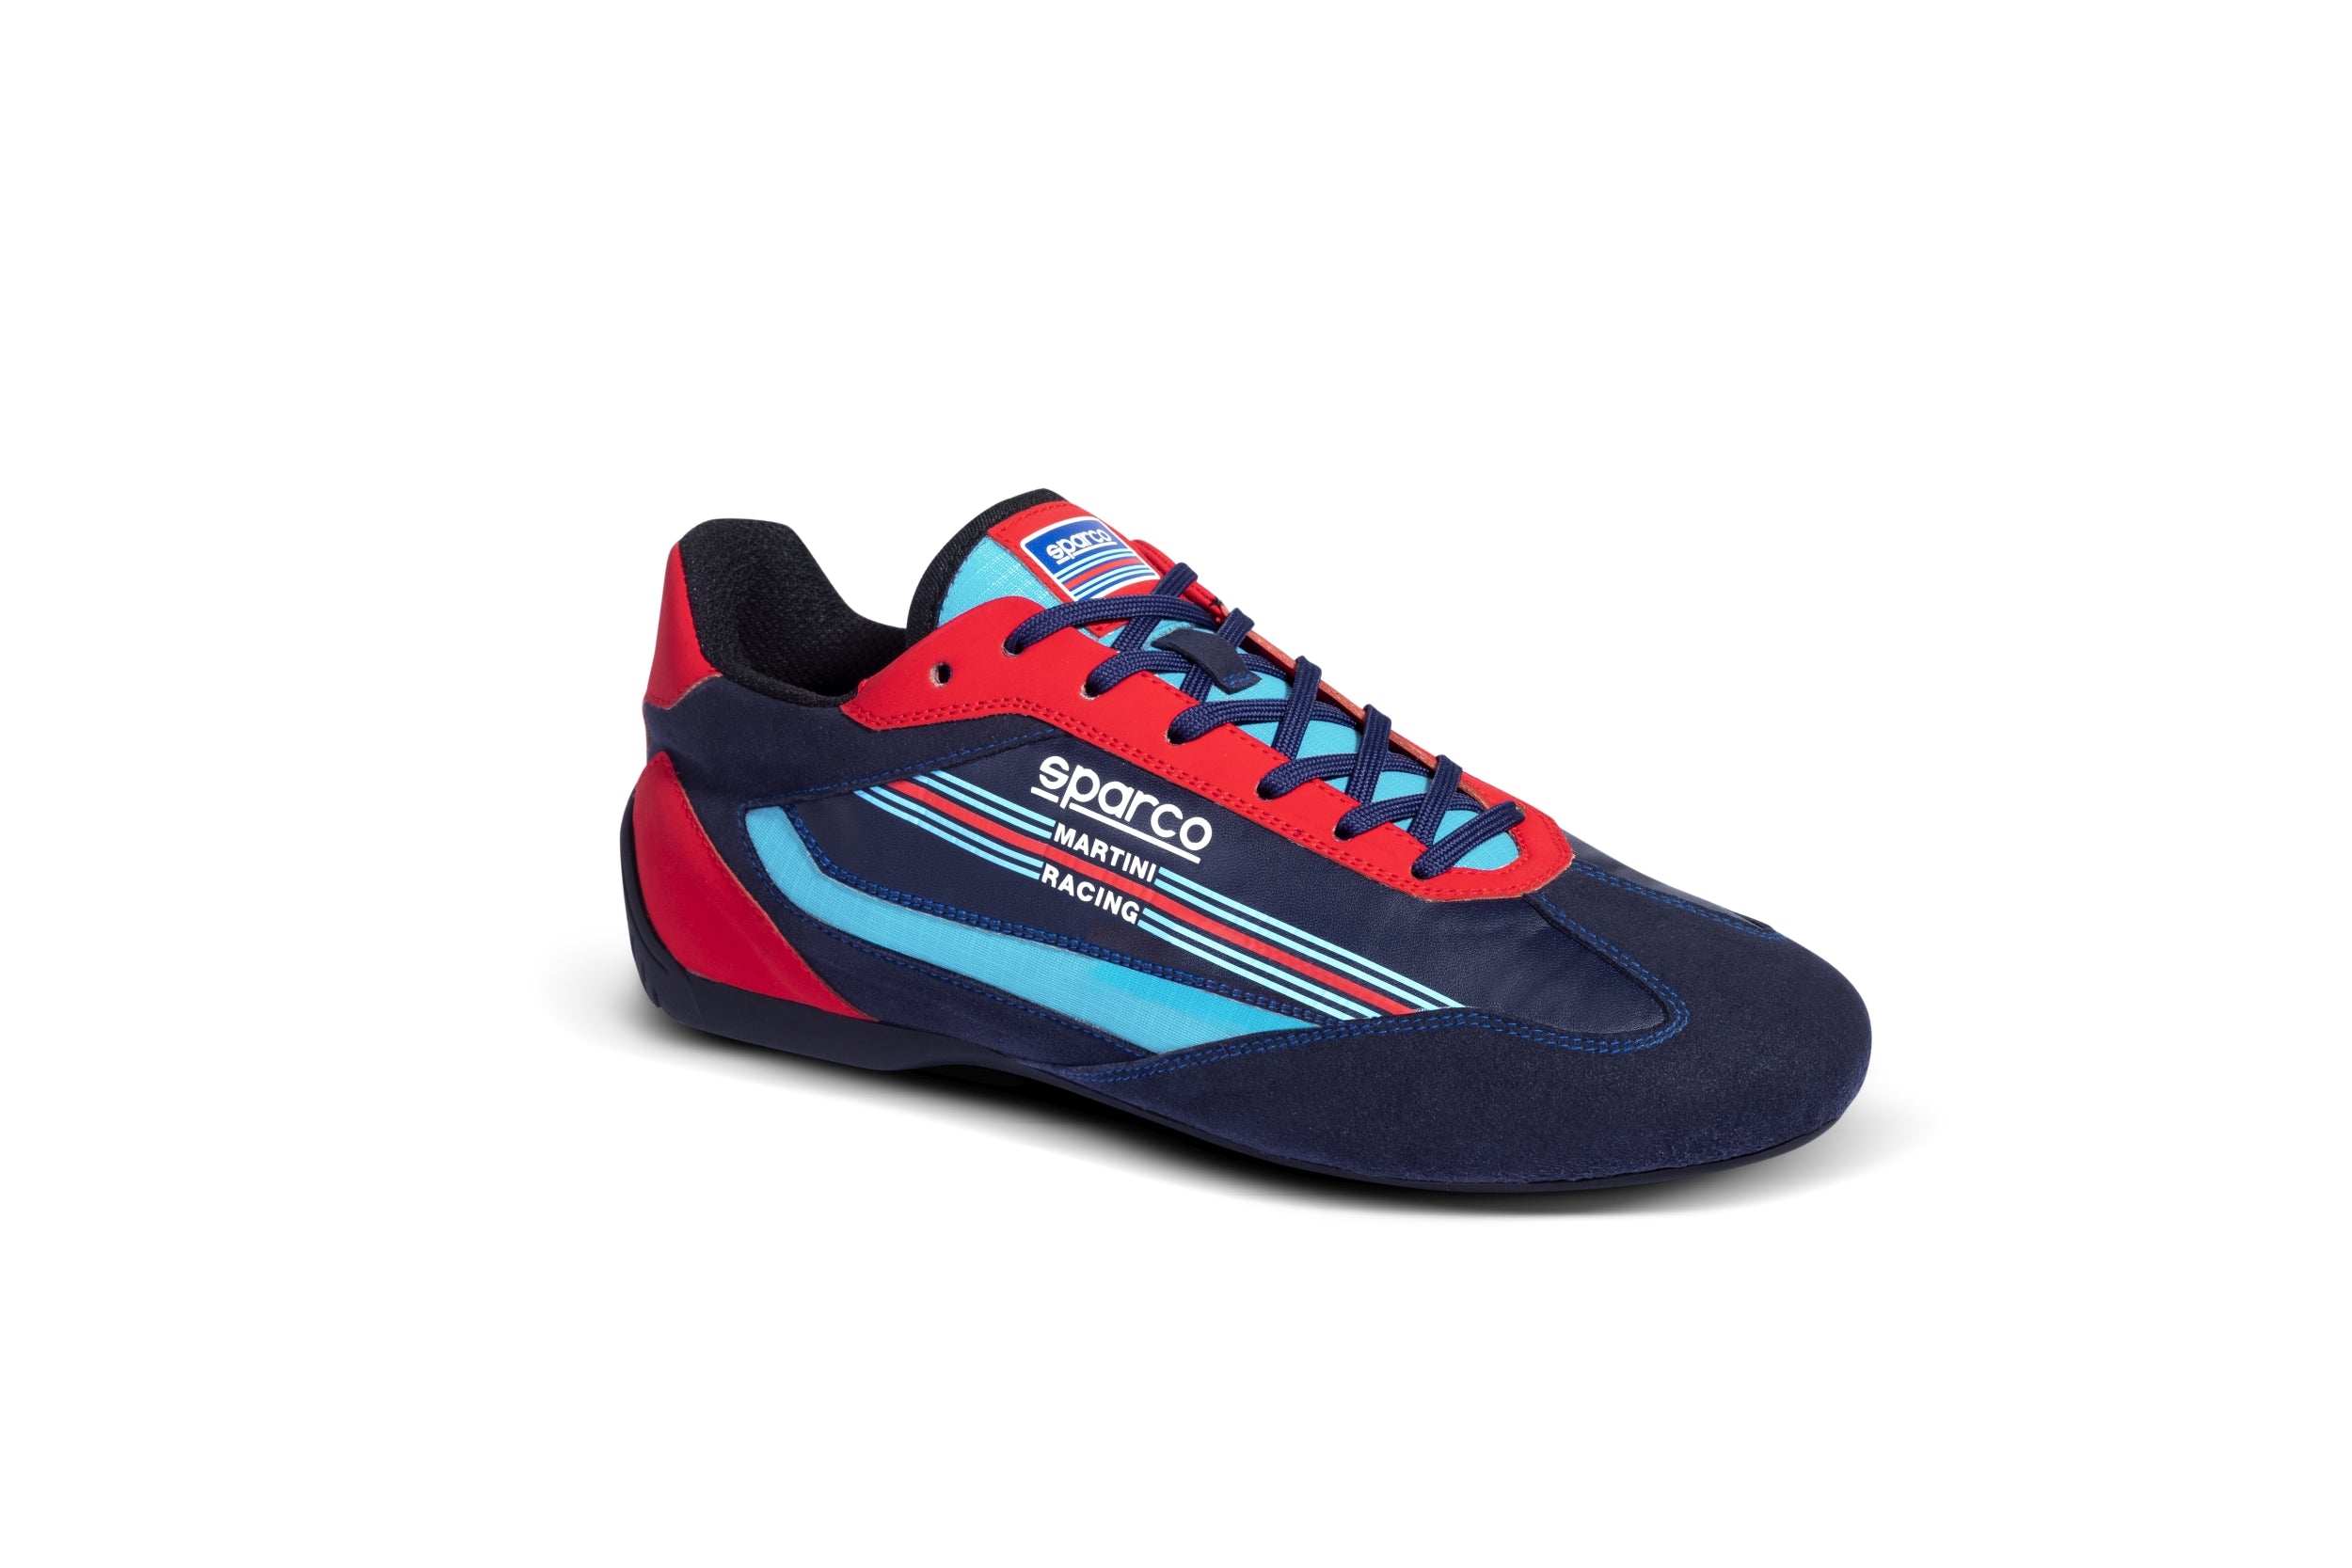 SPARCO 0012A7MR36BM S-DRIVE MARTINI RACING Sneakers shoes, navy blue, size 36 Photo-0 